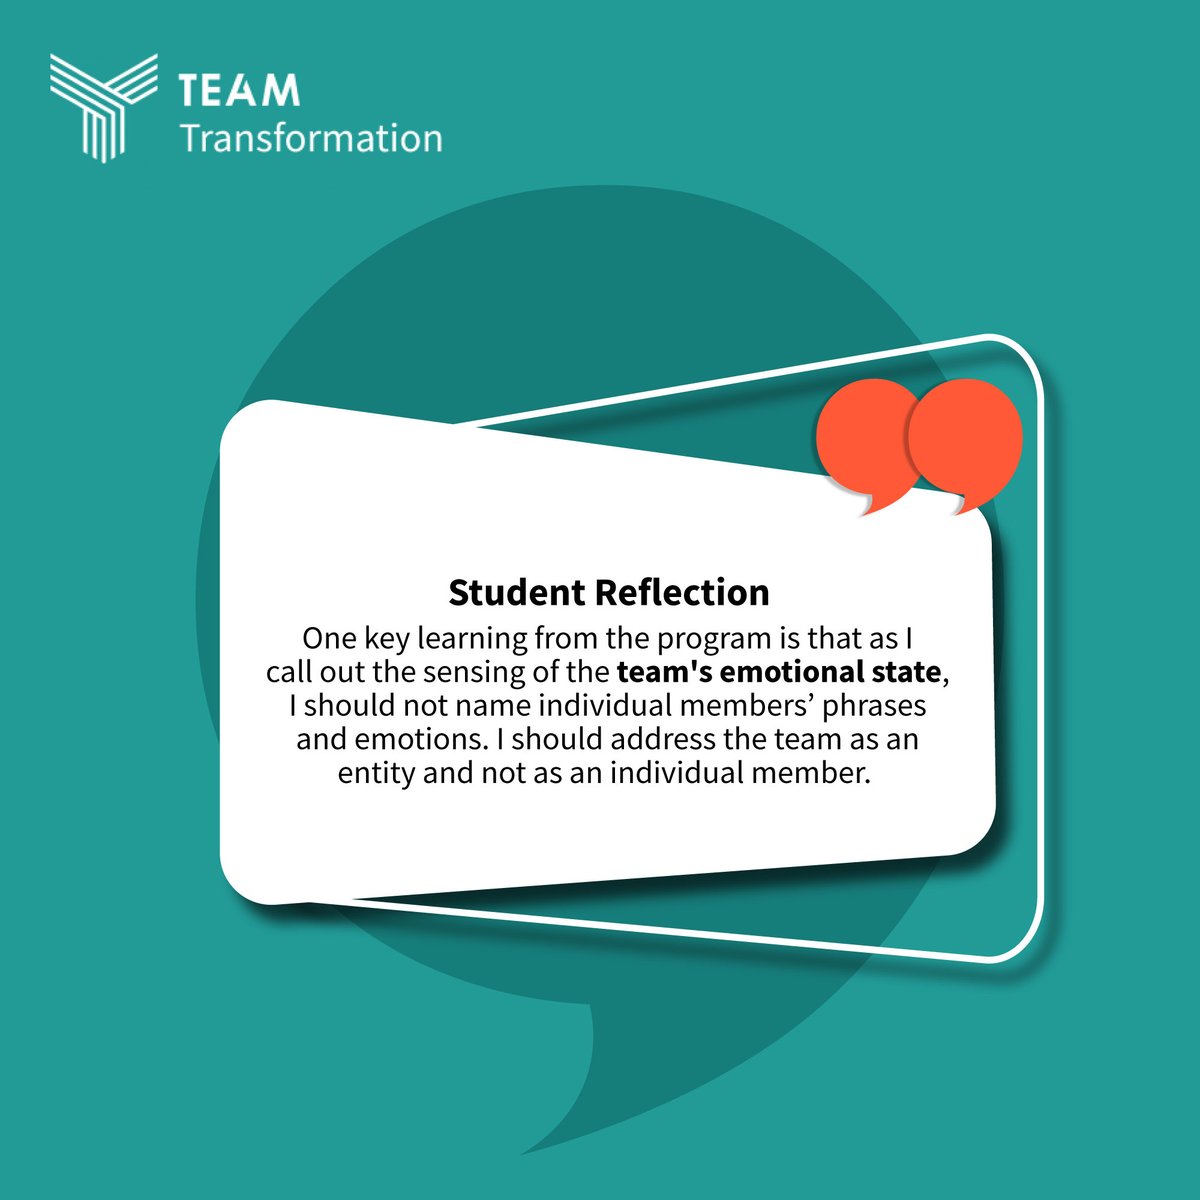 🎯 Ready to unlock your team's potential? Learn more about our program today: t.ly/OLG4y

#StudentReflection #TeamLeadership #EmotionalIntelligence #TeamworkTips #SystemicCoaching #TeamPerformance #TeamTransformation #icfcoaching #ICFACTC #ProfessionalDevelopment